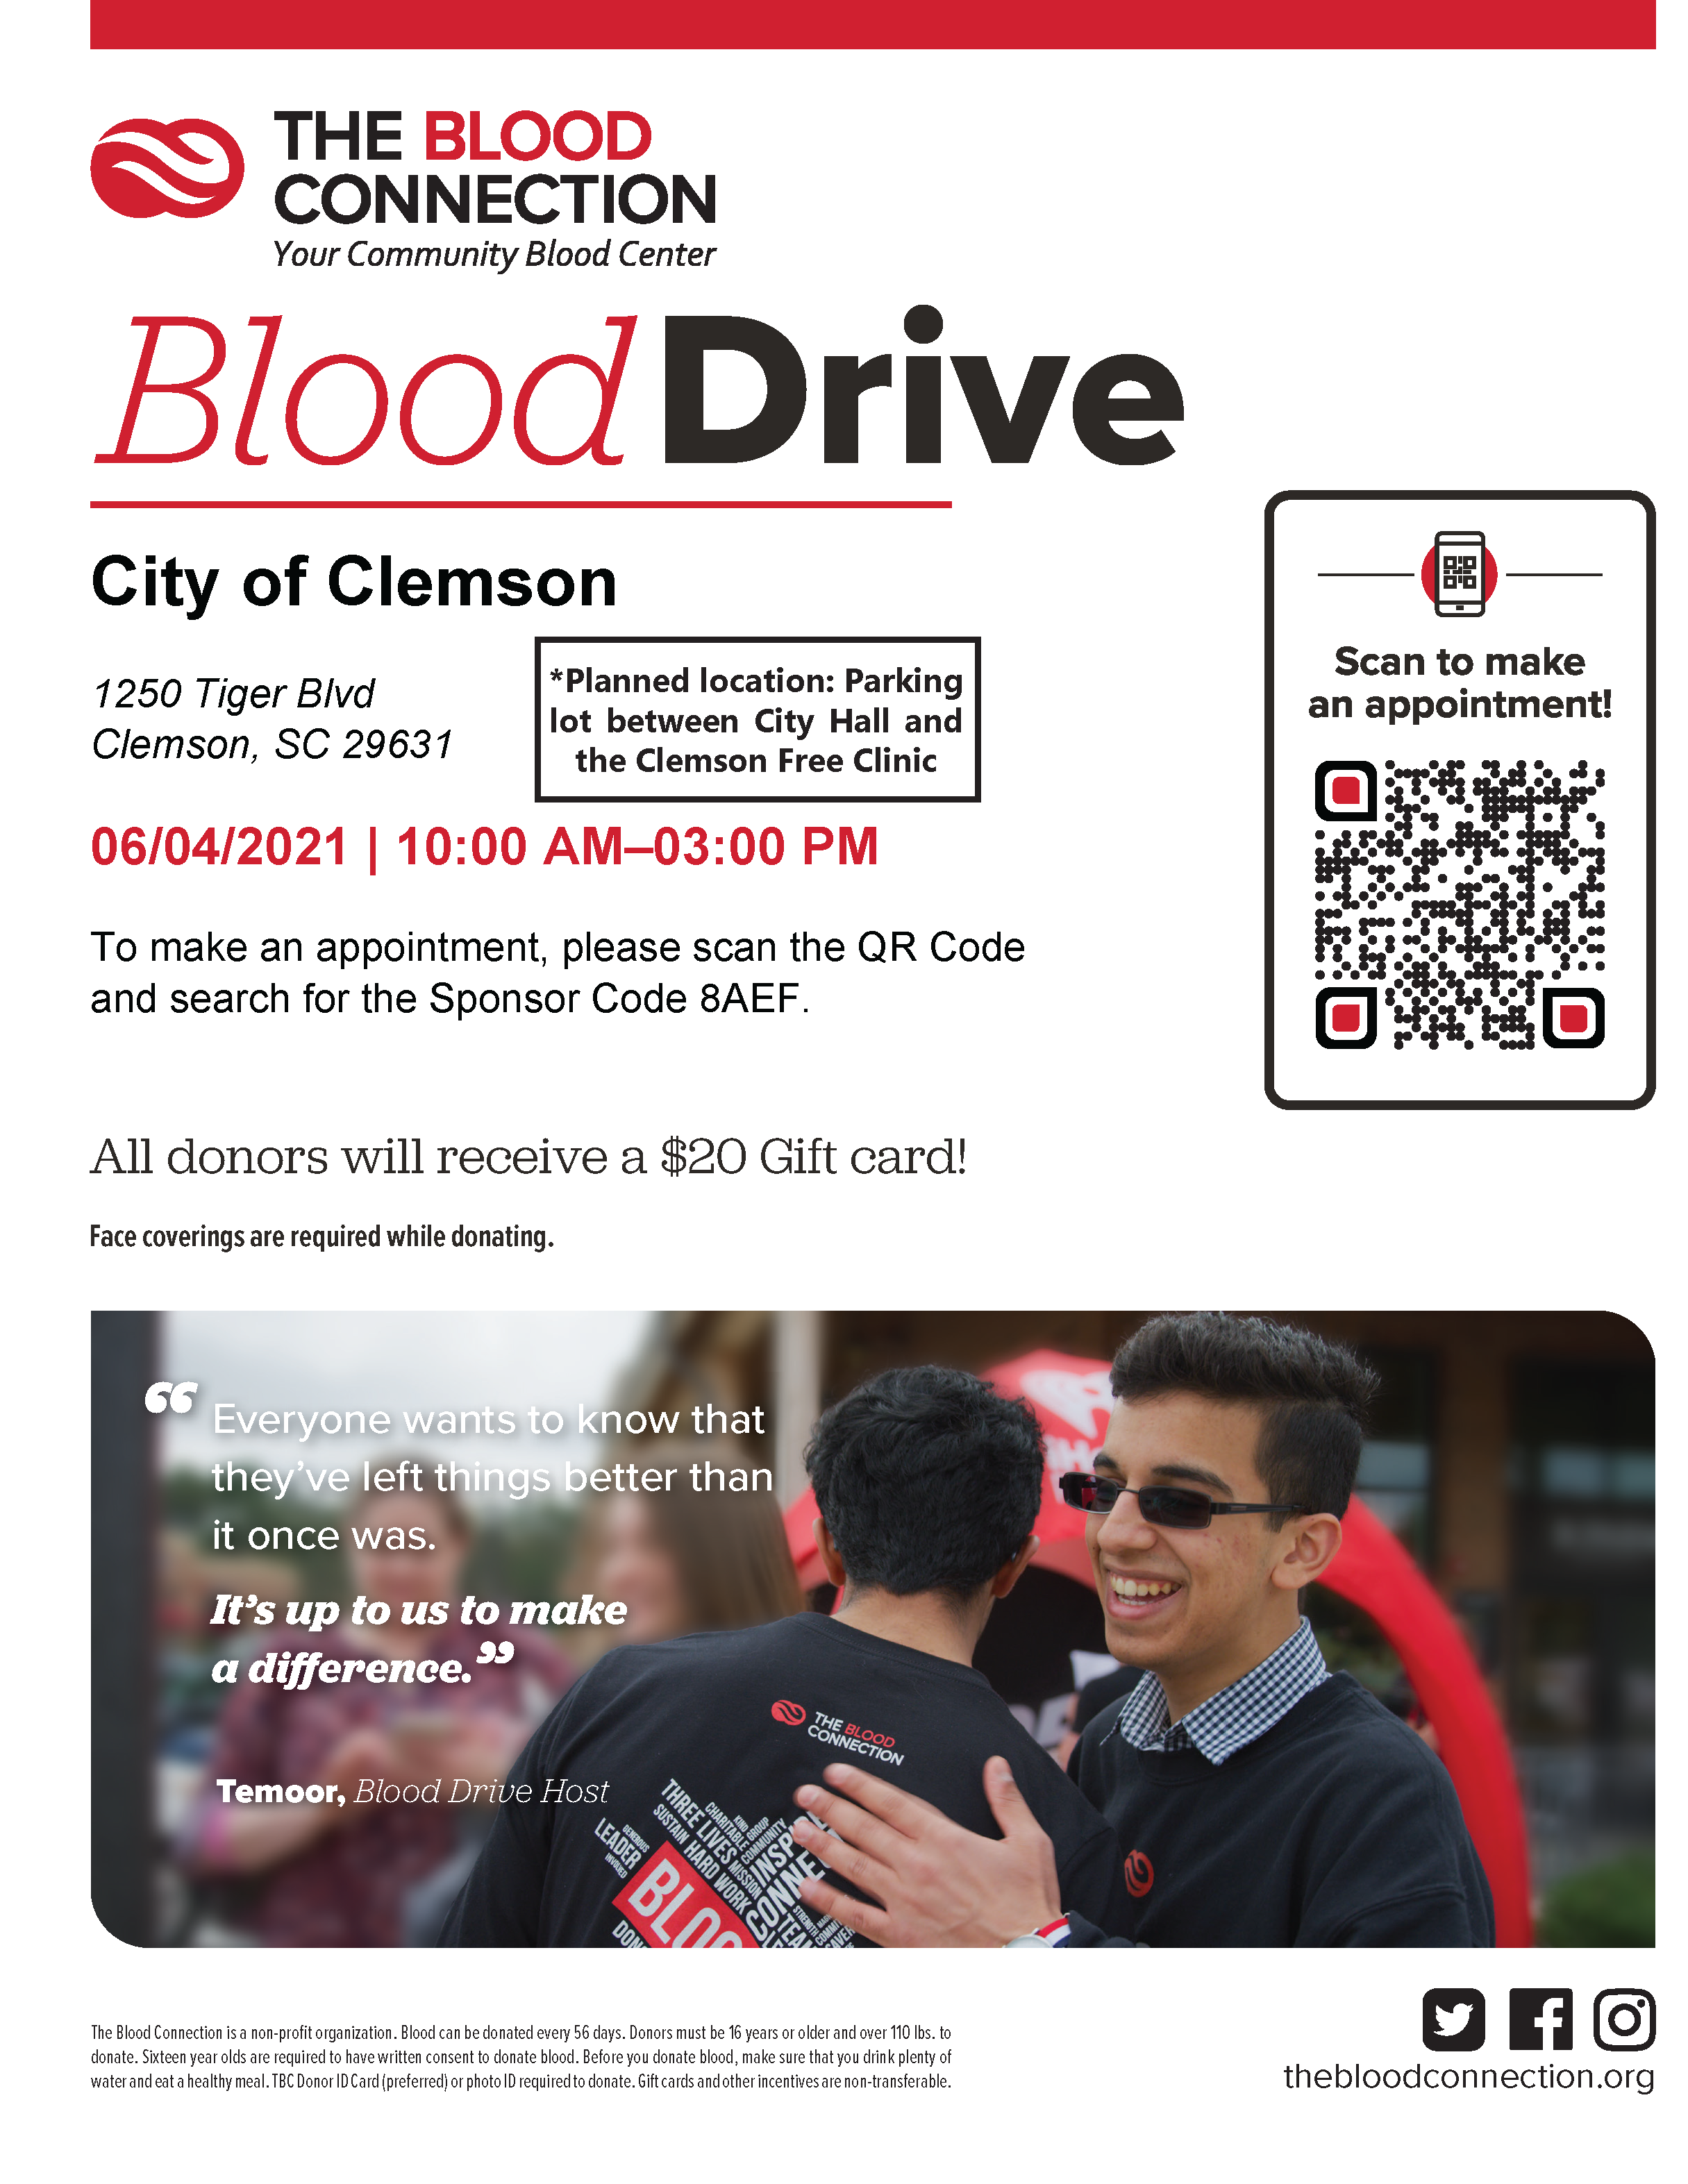 June 4, 2021 Blood Drive at City Hall